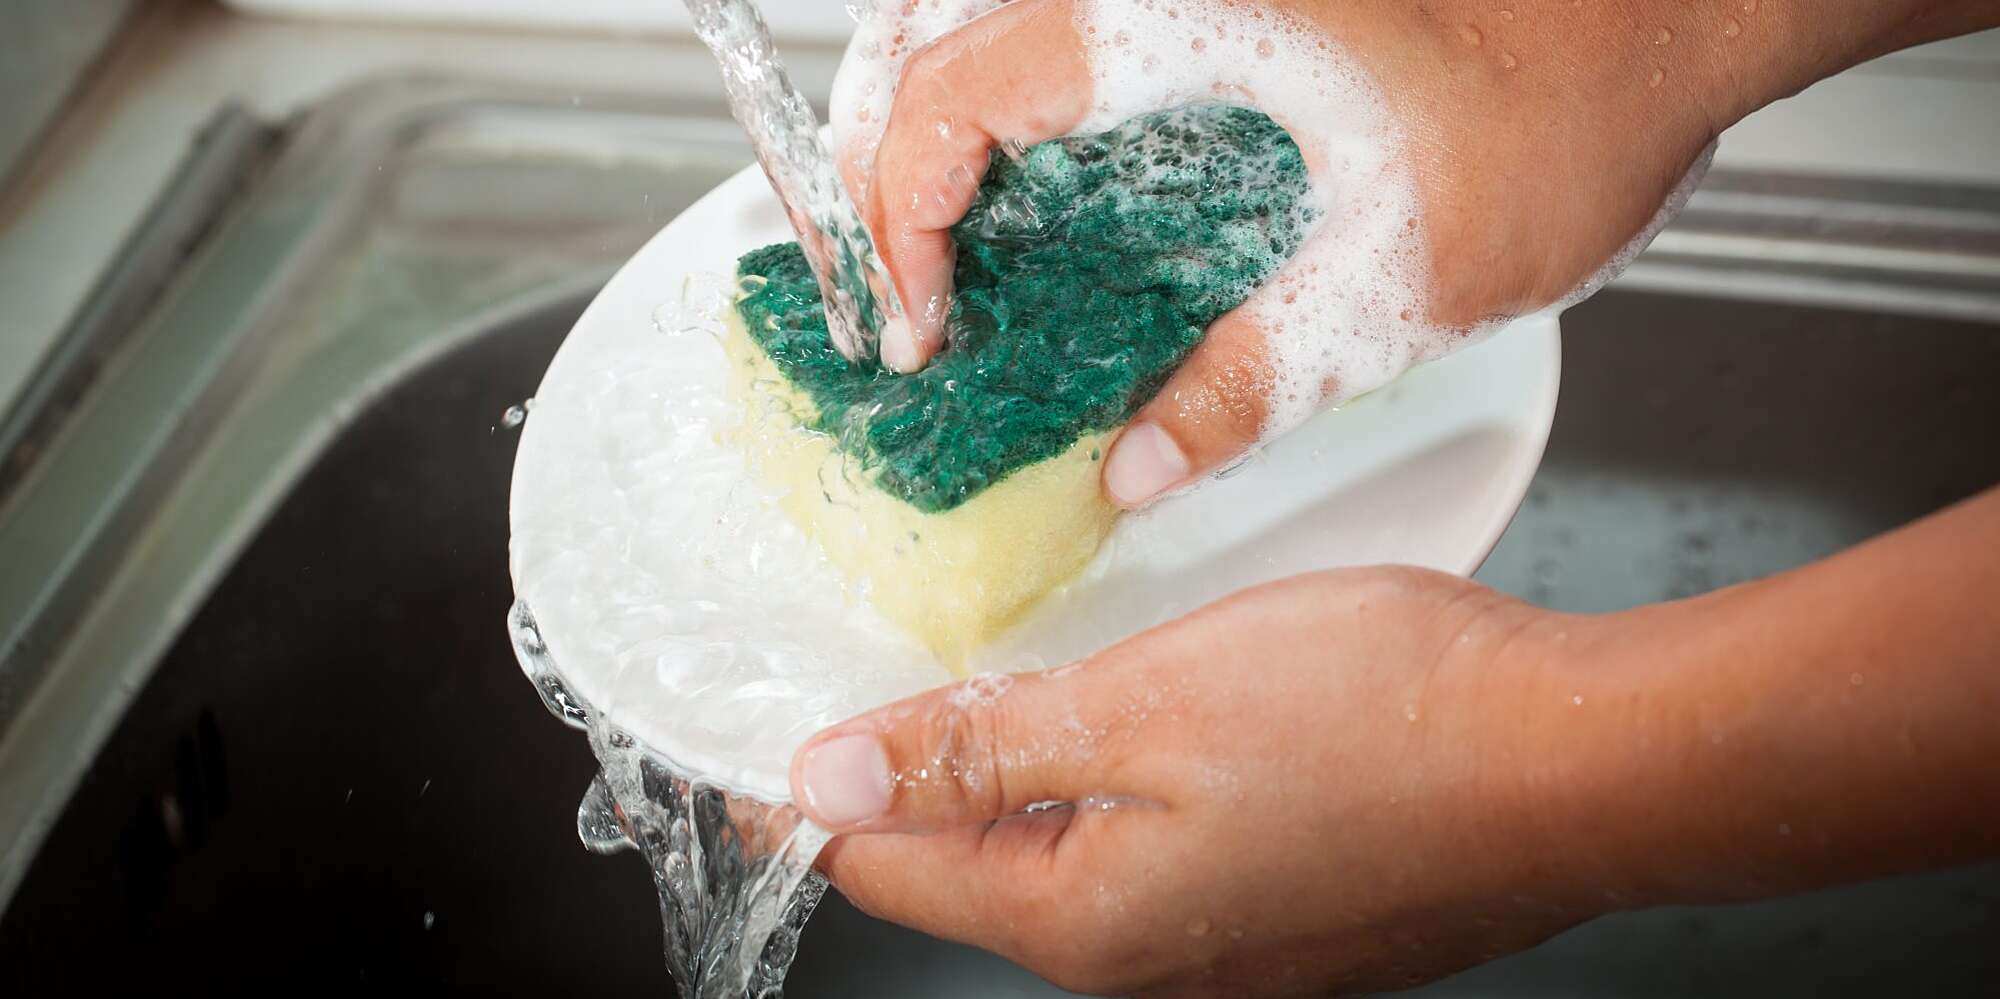 Need-to-Know Info About Your Kitchen Sponge